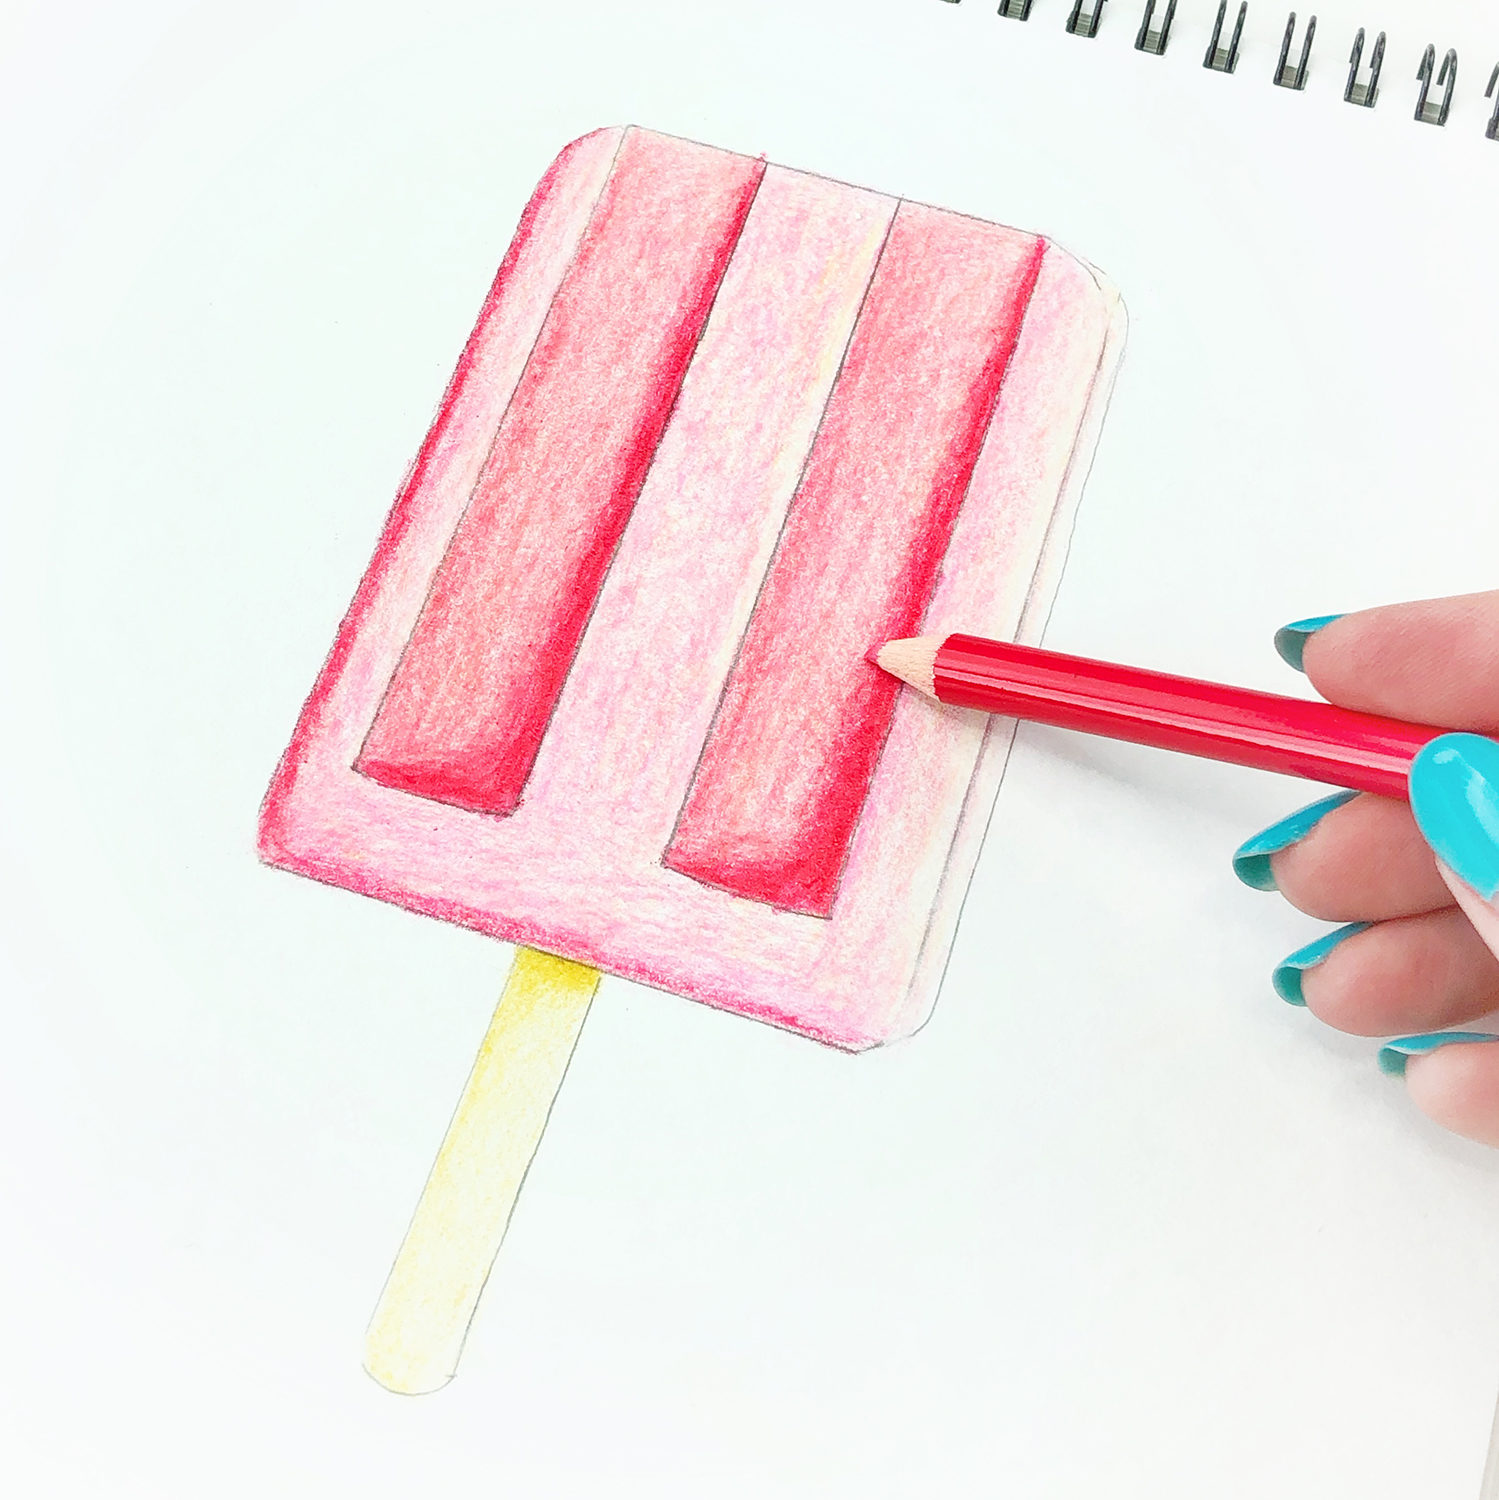 How to Draw a Colored Pencil Popsicle by Jessica Mack on behalf of Tombow.